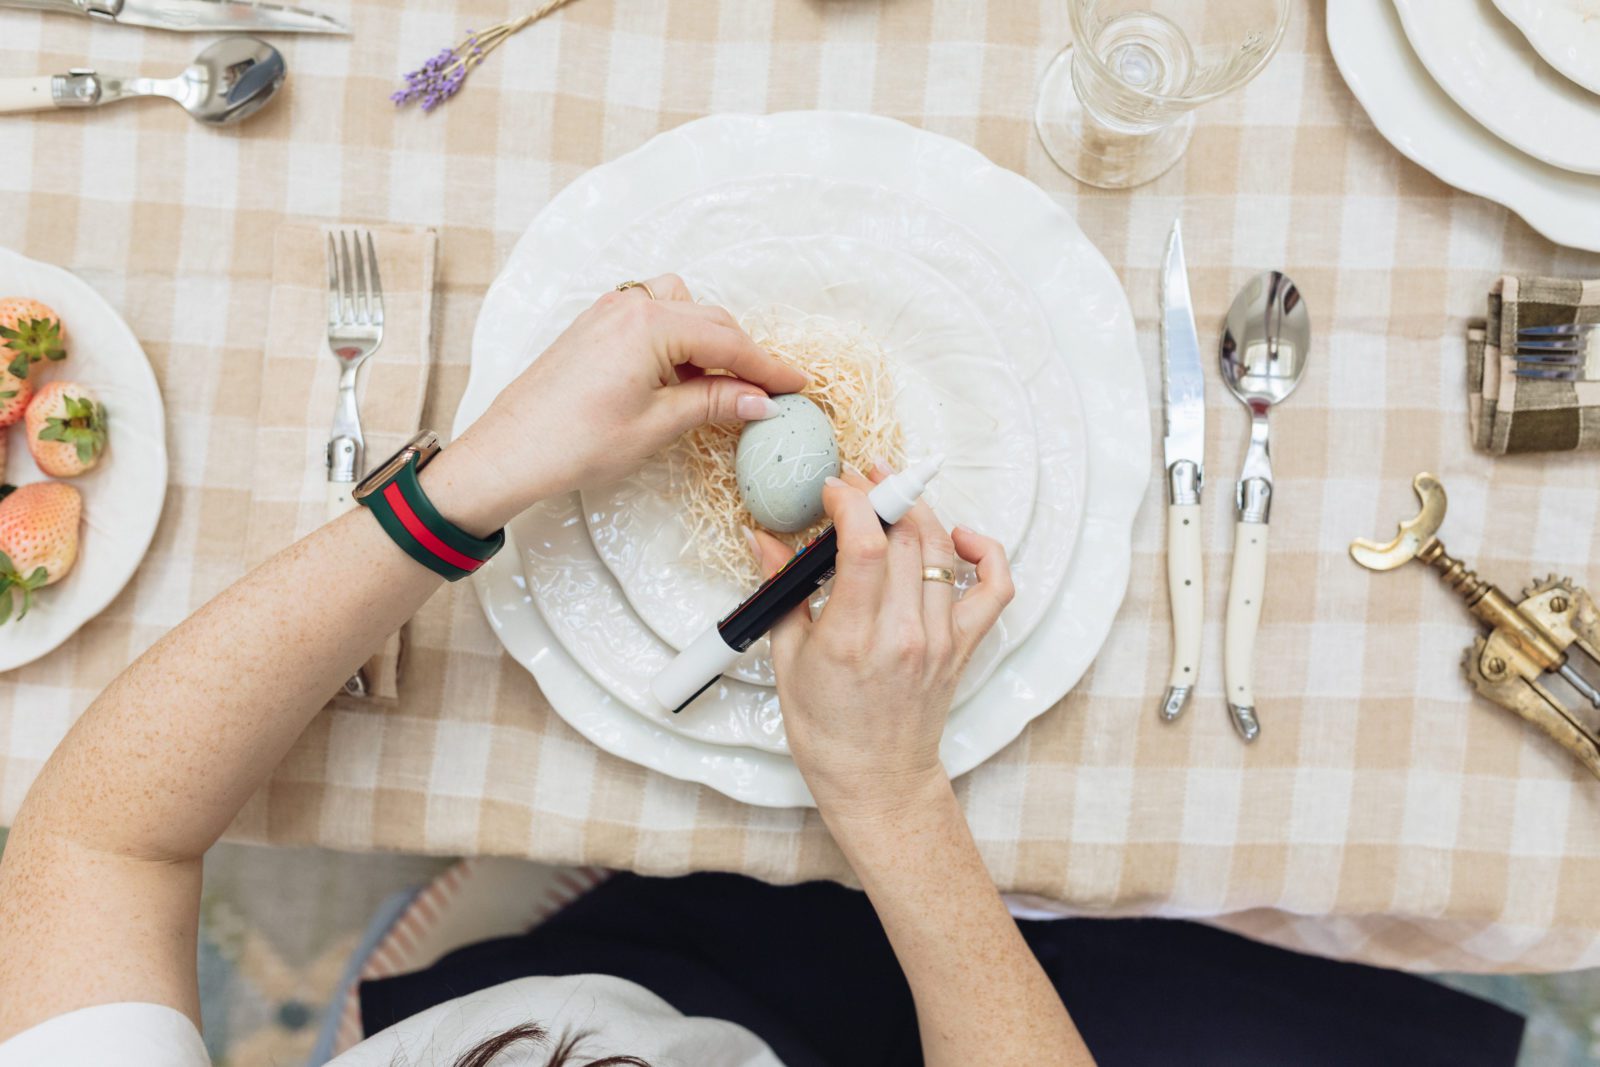 Top down view of a woman writing a name on a light blue egg. The egg is a seat placement for a semi-formal spring lunch.